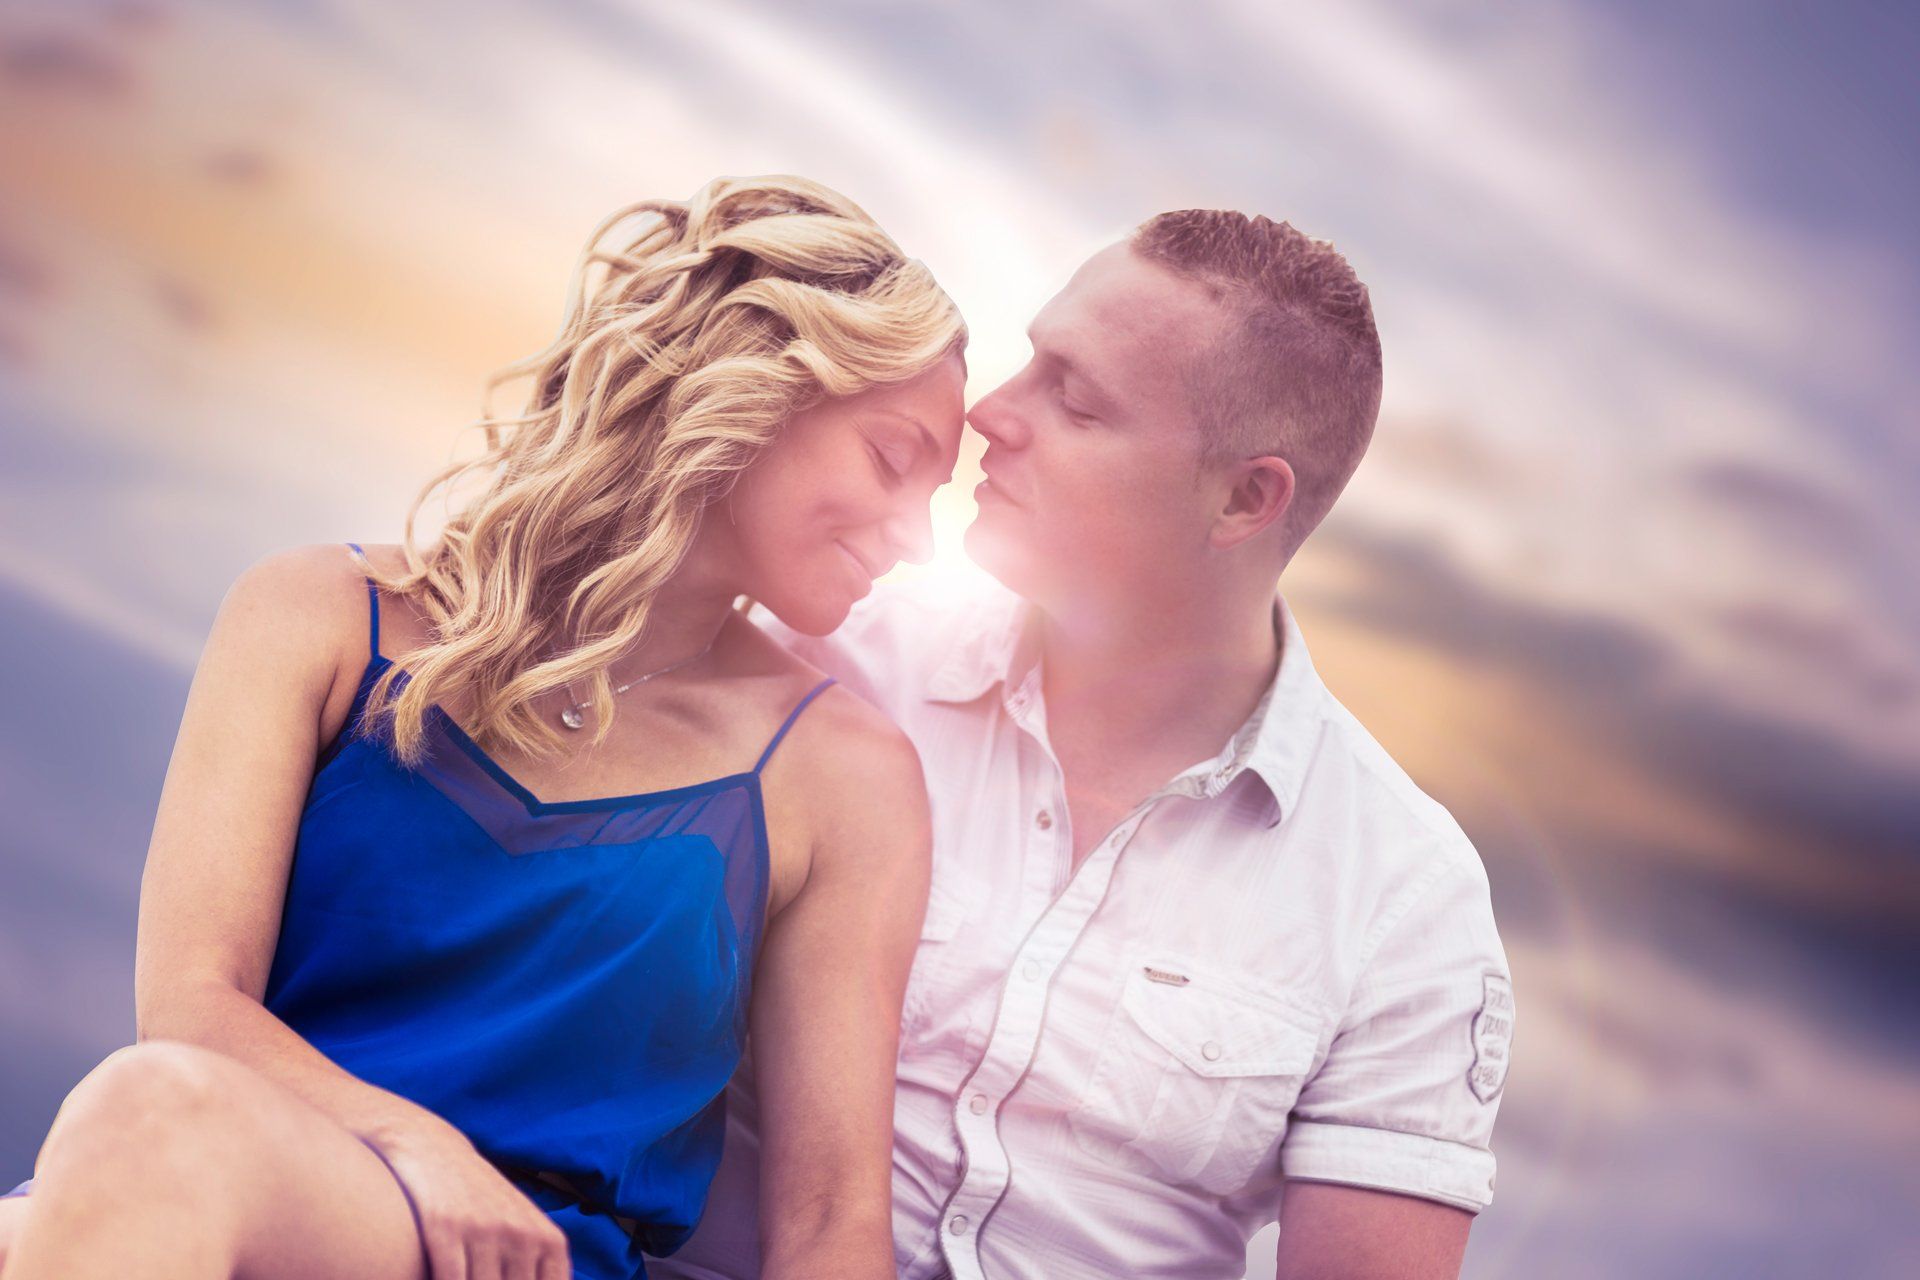 engagement photography, photography in toronto, wedding photography,glamour photography, wedding photographer,couple photography